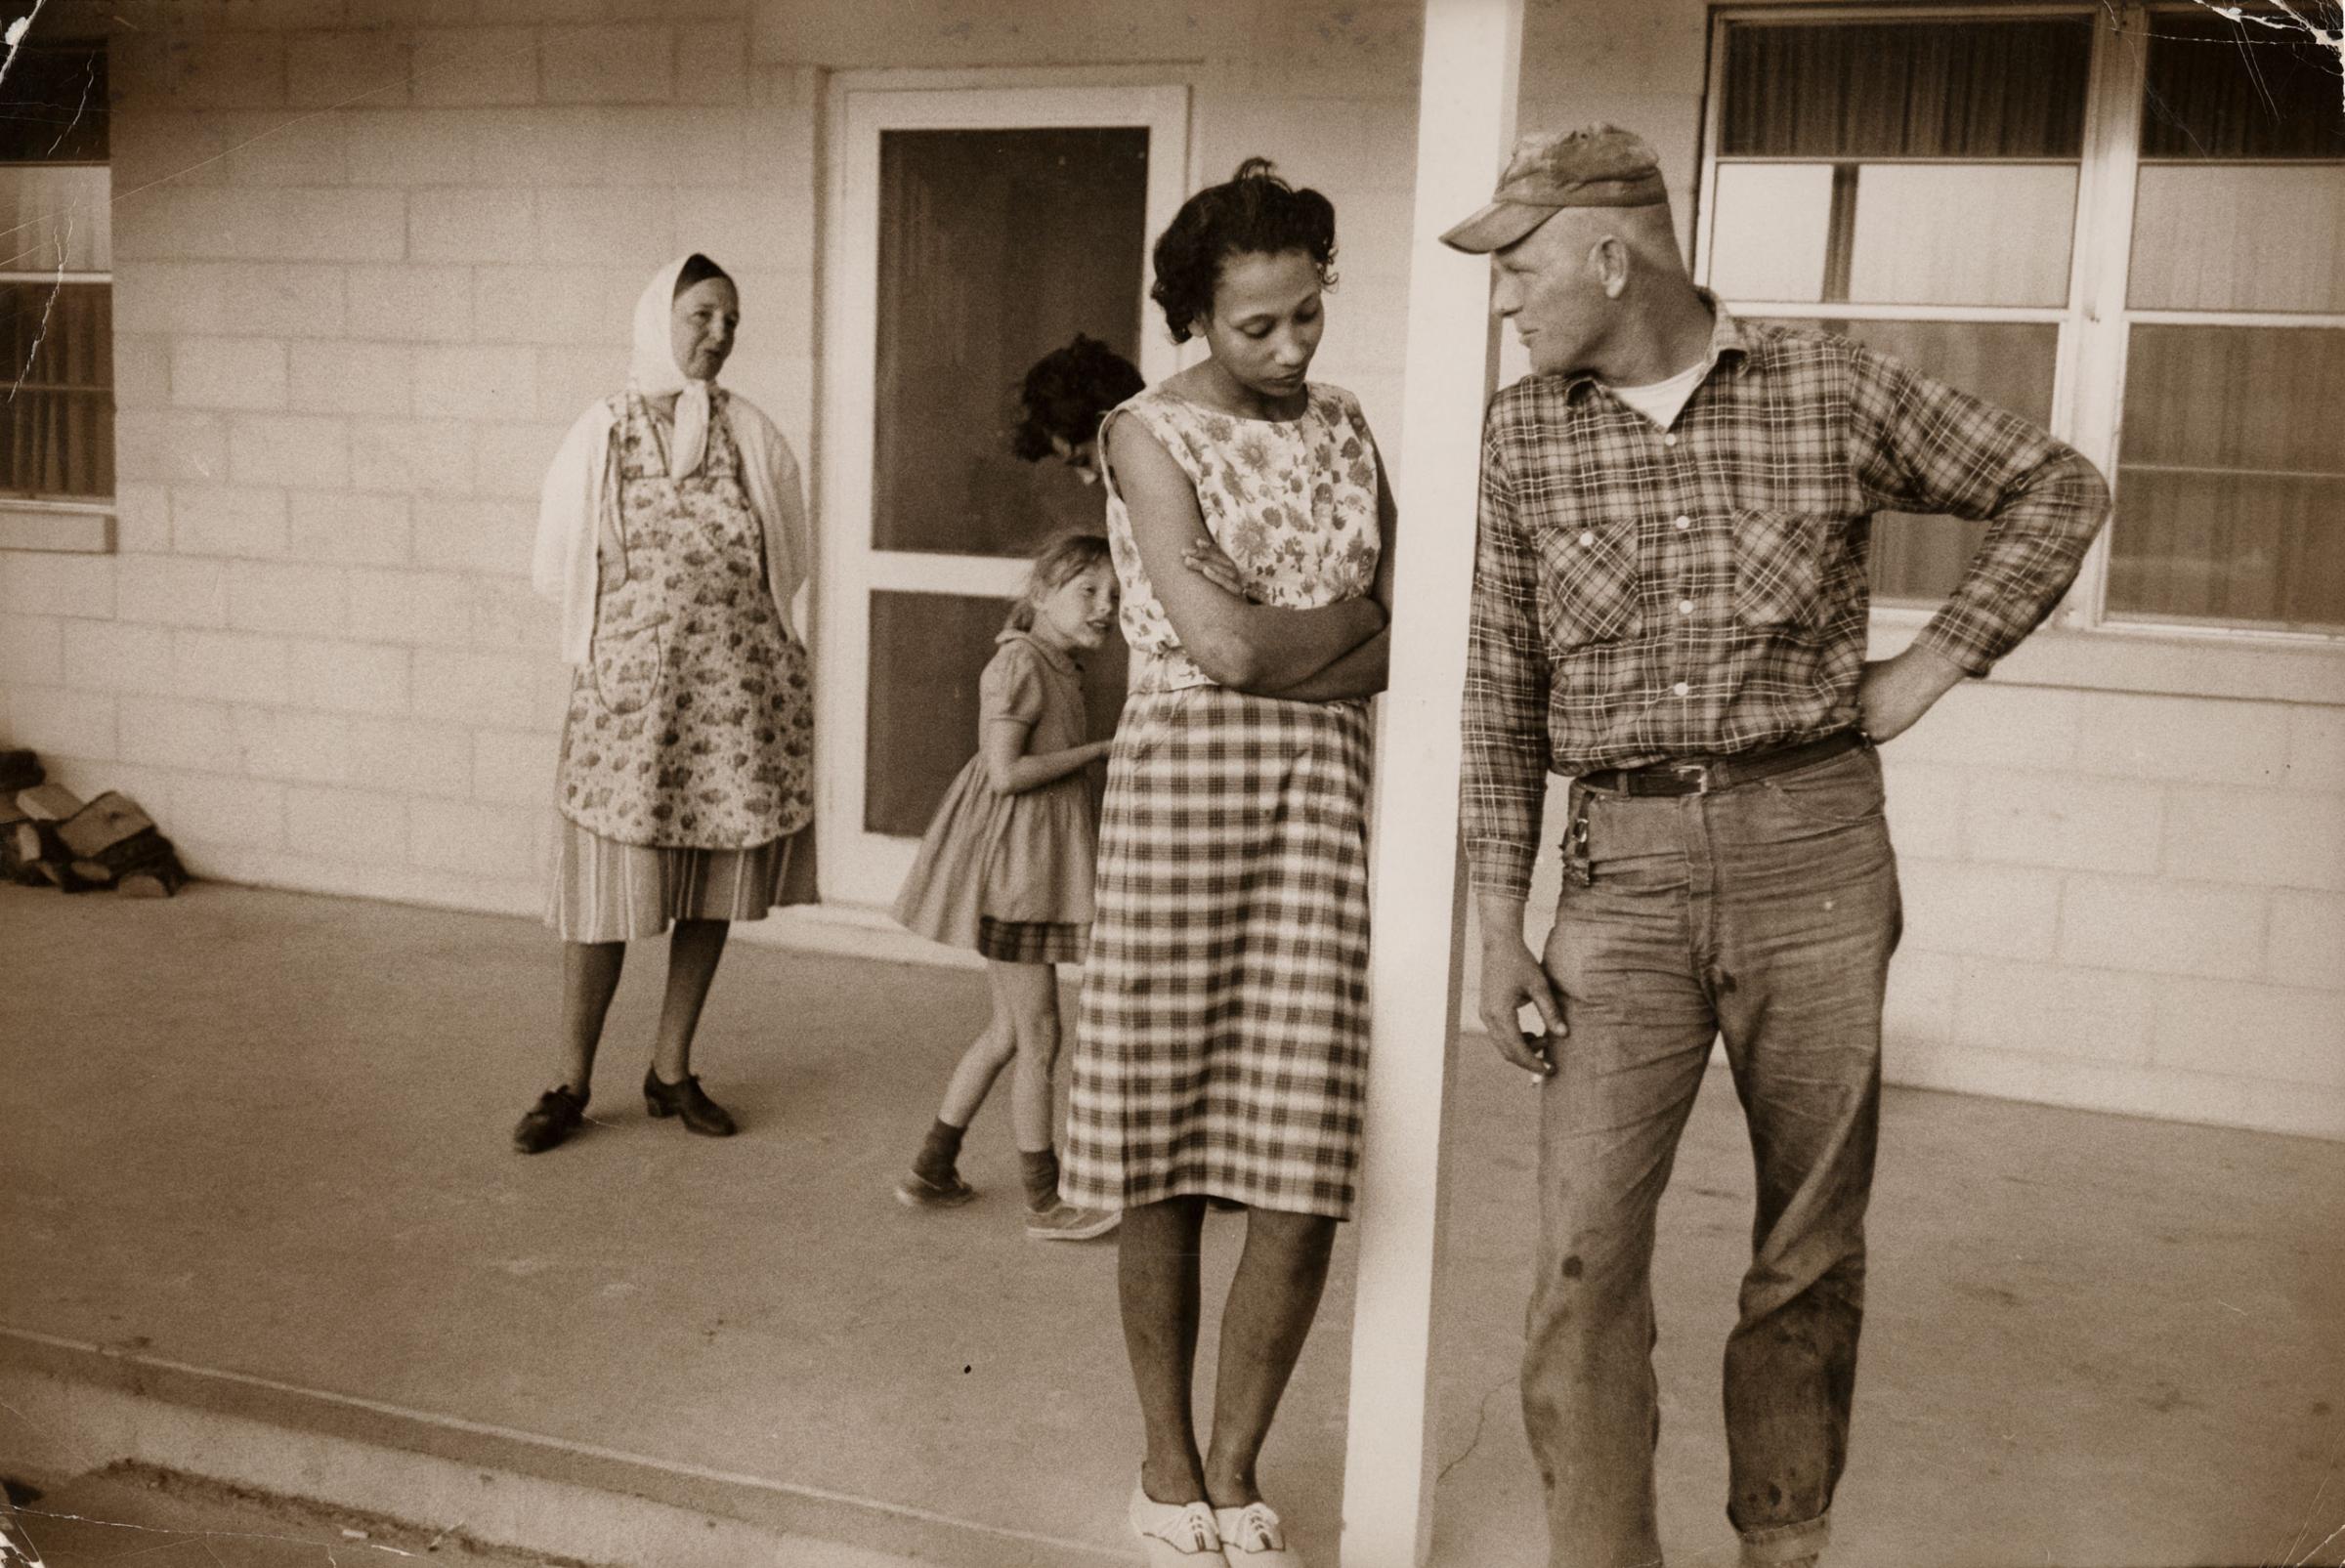 Mildred and Richard Loving, their daughter Peggy, Mildred’s sister Garnet, and Richard’s mother Lola, on the front porch of Mildred’s mother’s house, Caroline County, Virginia, April 1965.